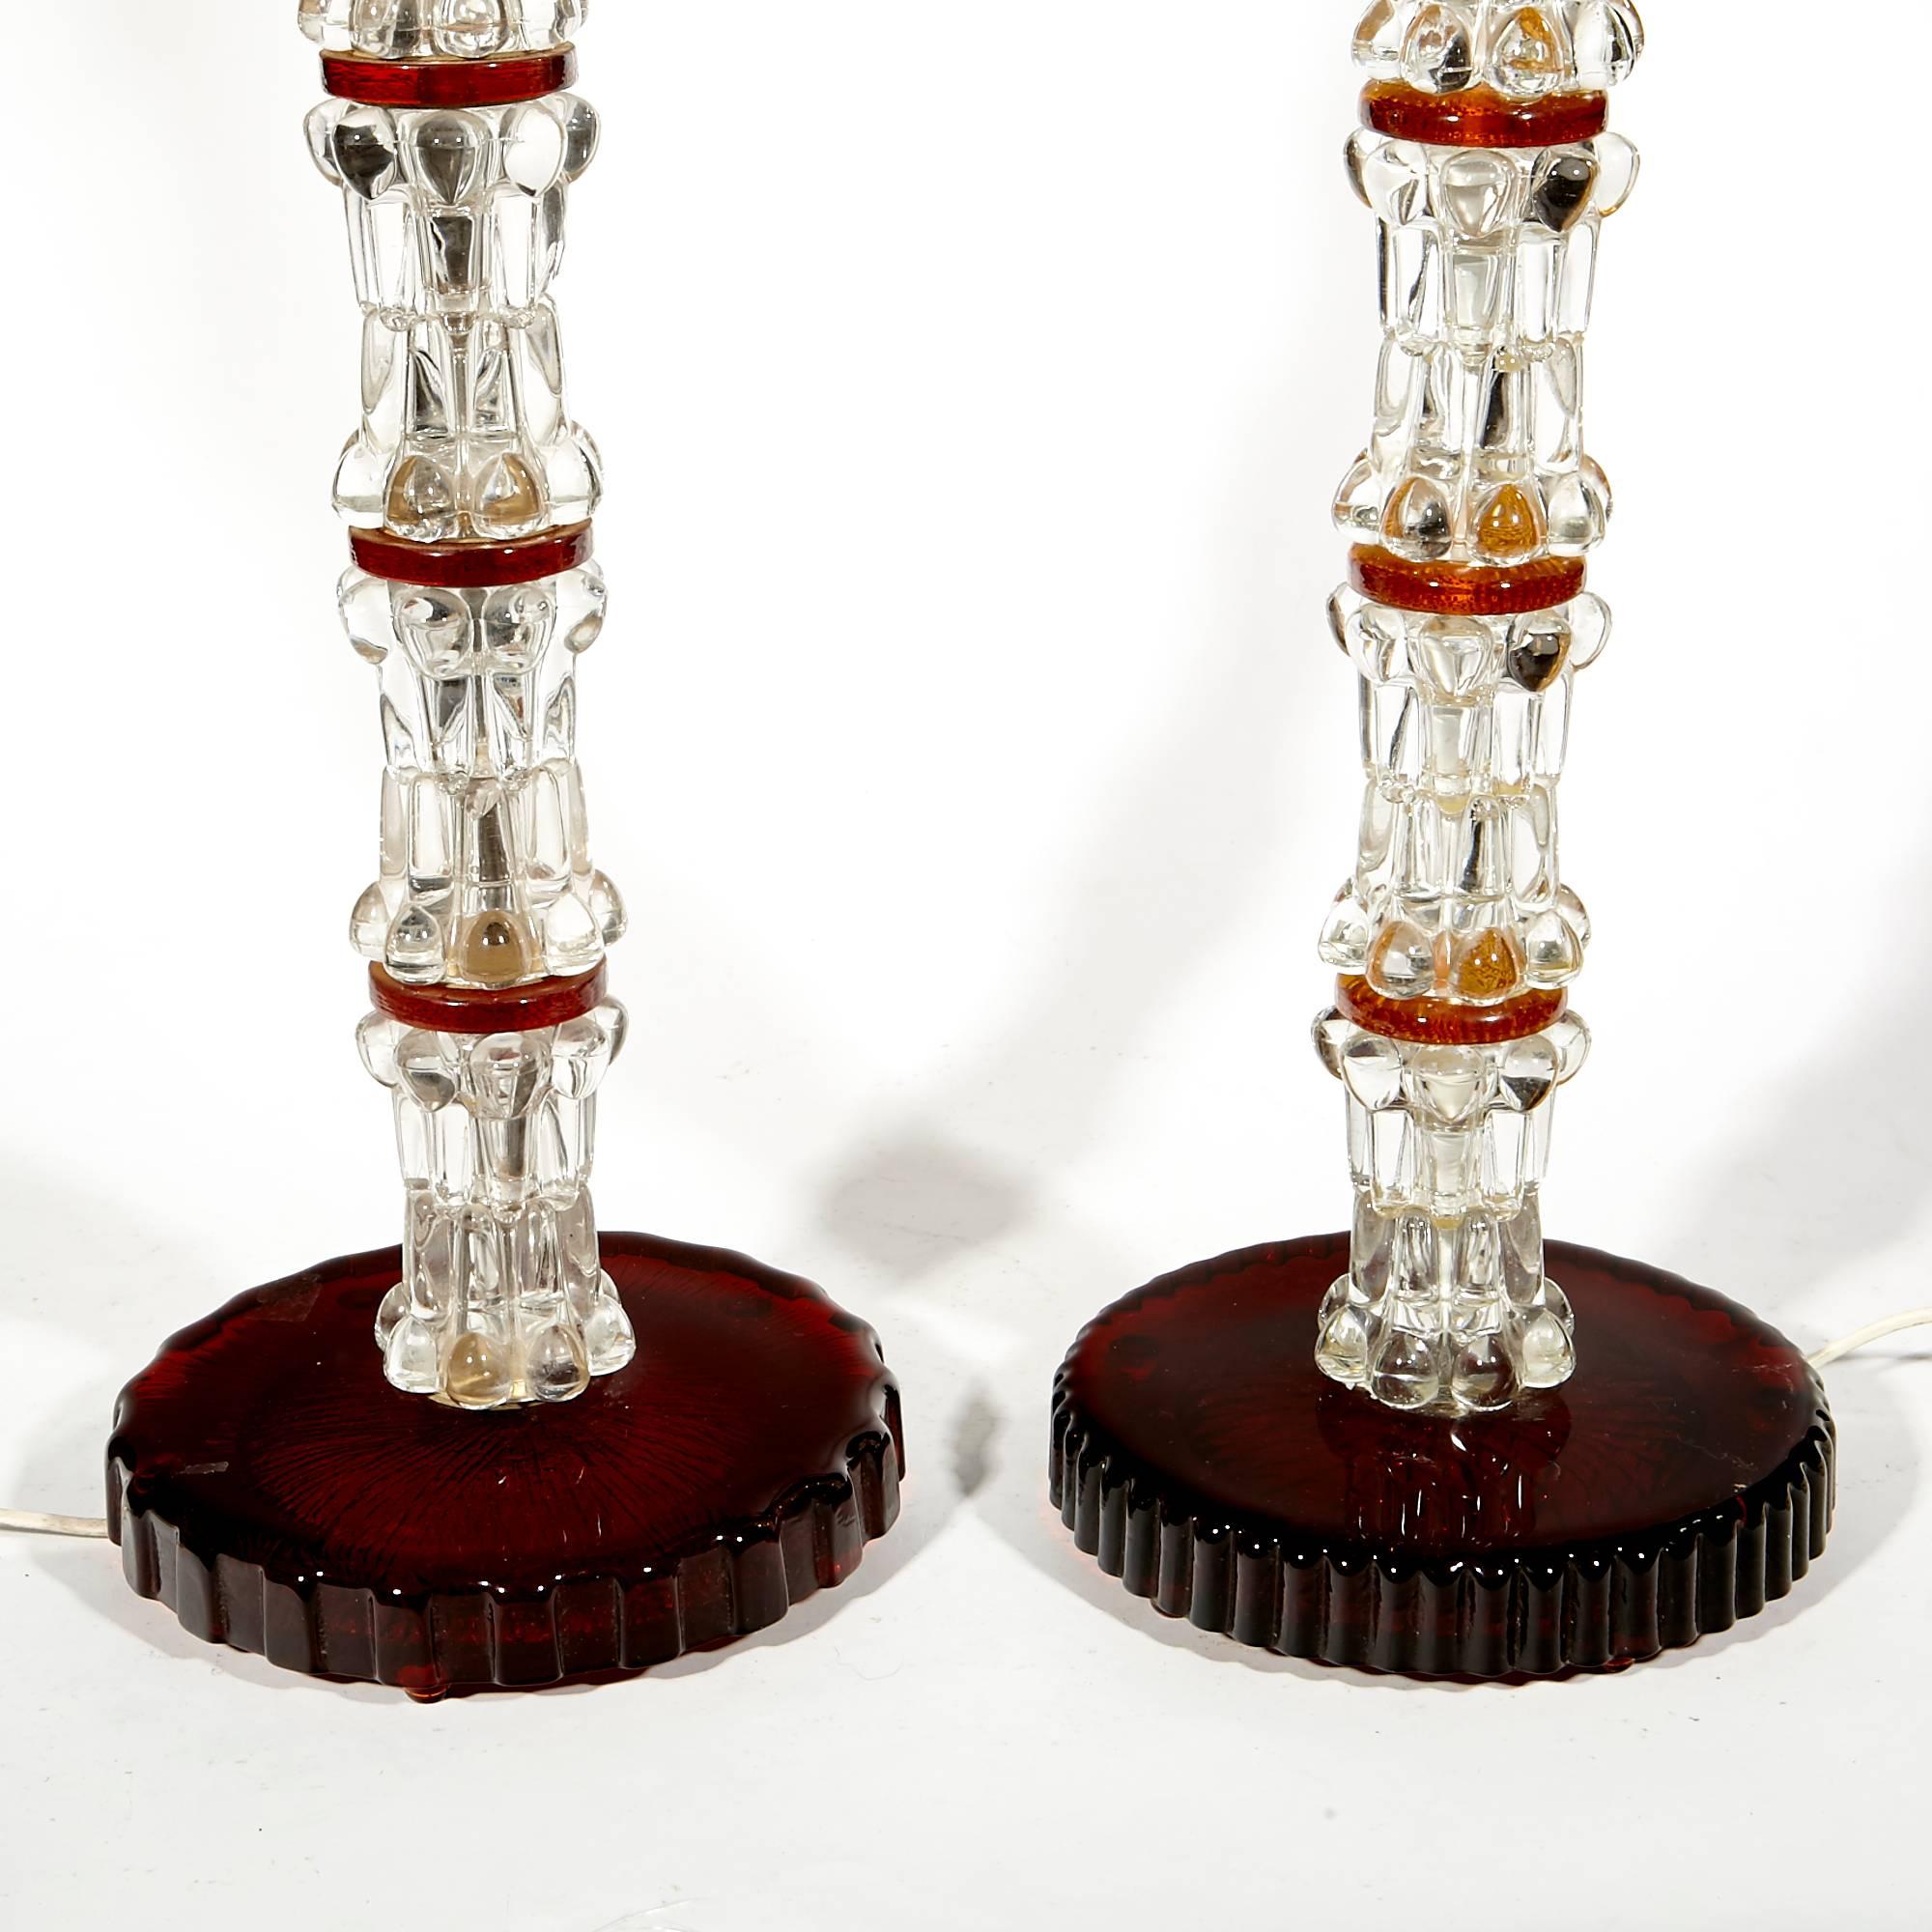 Vintage pair of 1960s Orrefors of Sweden crystal stacked lamps designed by Carl Fagerlund. The lamps have an alternating red glass accent. Uses standard size bulbs. The shorter lamp is 8.5in. Dia x 33.75in. H.

  